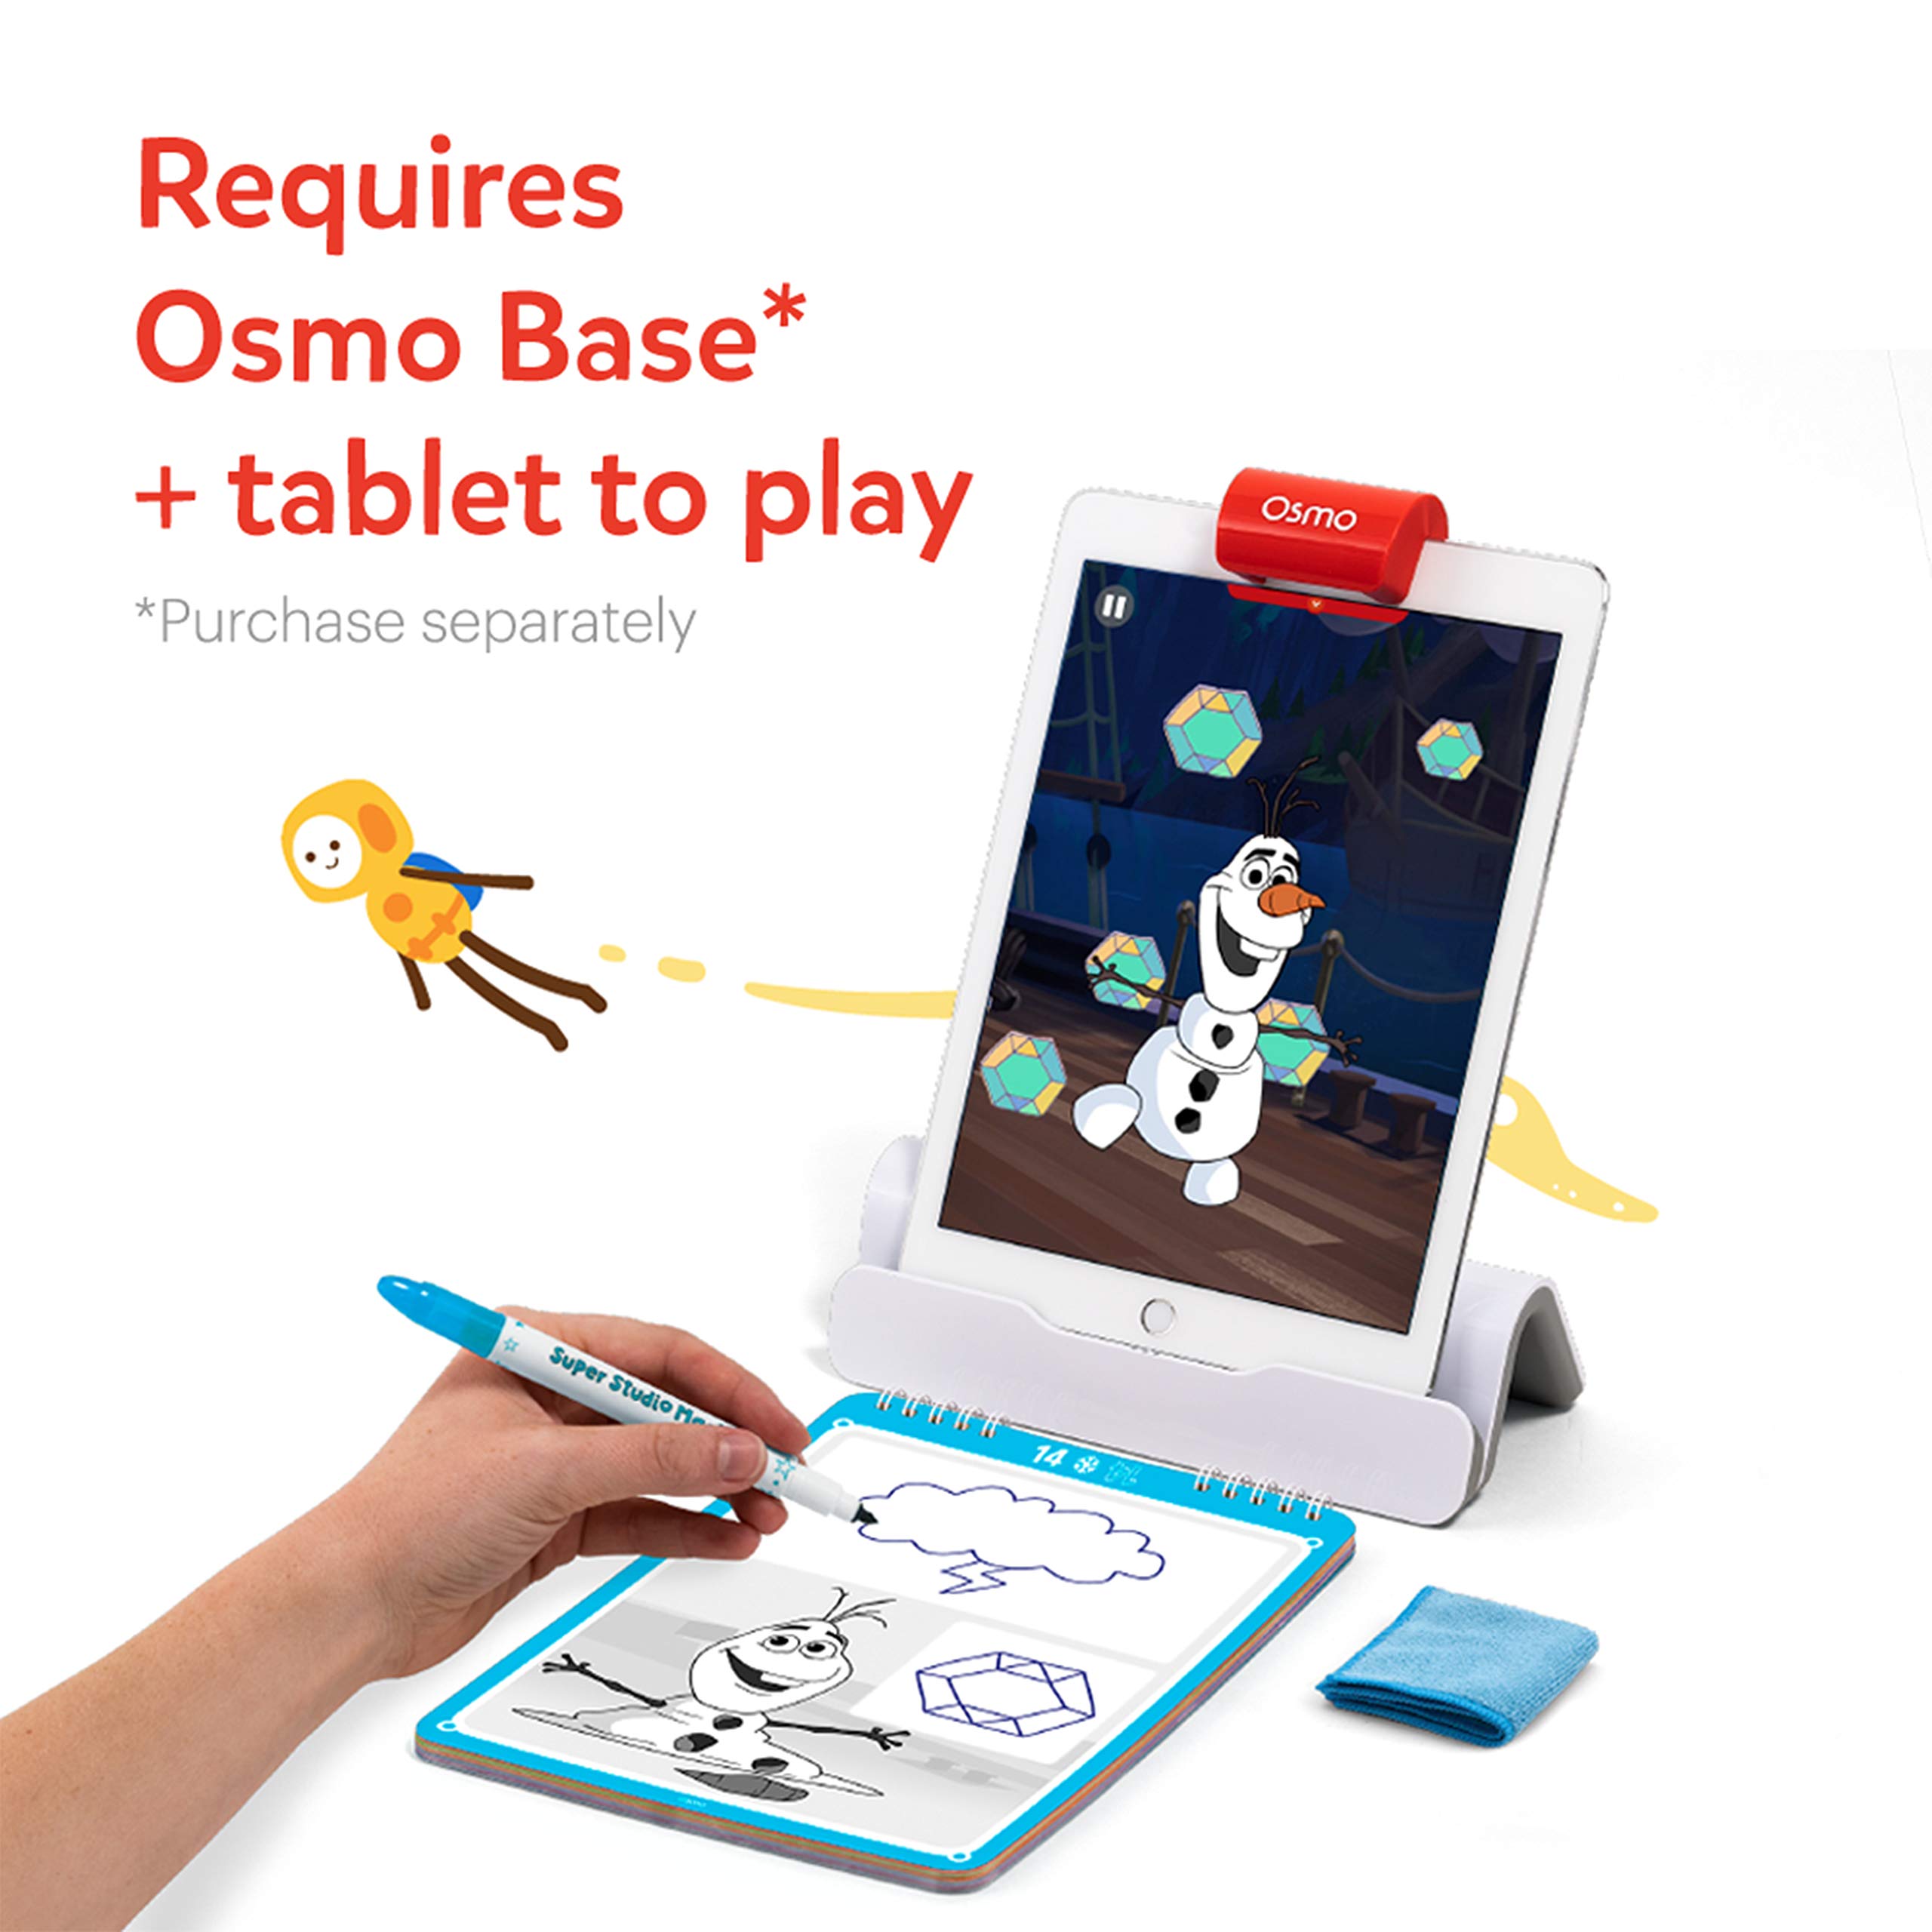 Osmo - Super Studio Disney Frozen 2 - Ages 5-11 - Learn to Draw - For iPad or Fire Tablet Educational Learning Games - STEM Toy Gifts for Kids, Boy & Girl - Ages 5 6 7 8 9 10 11 (Osmo Base Required)